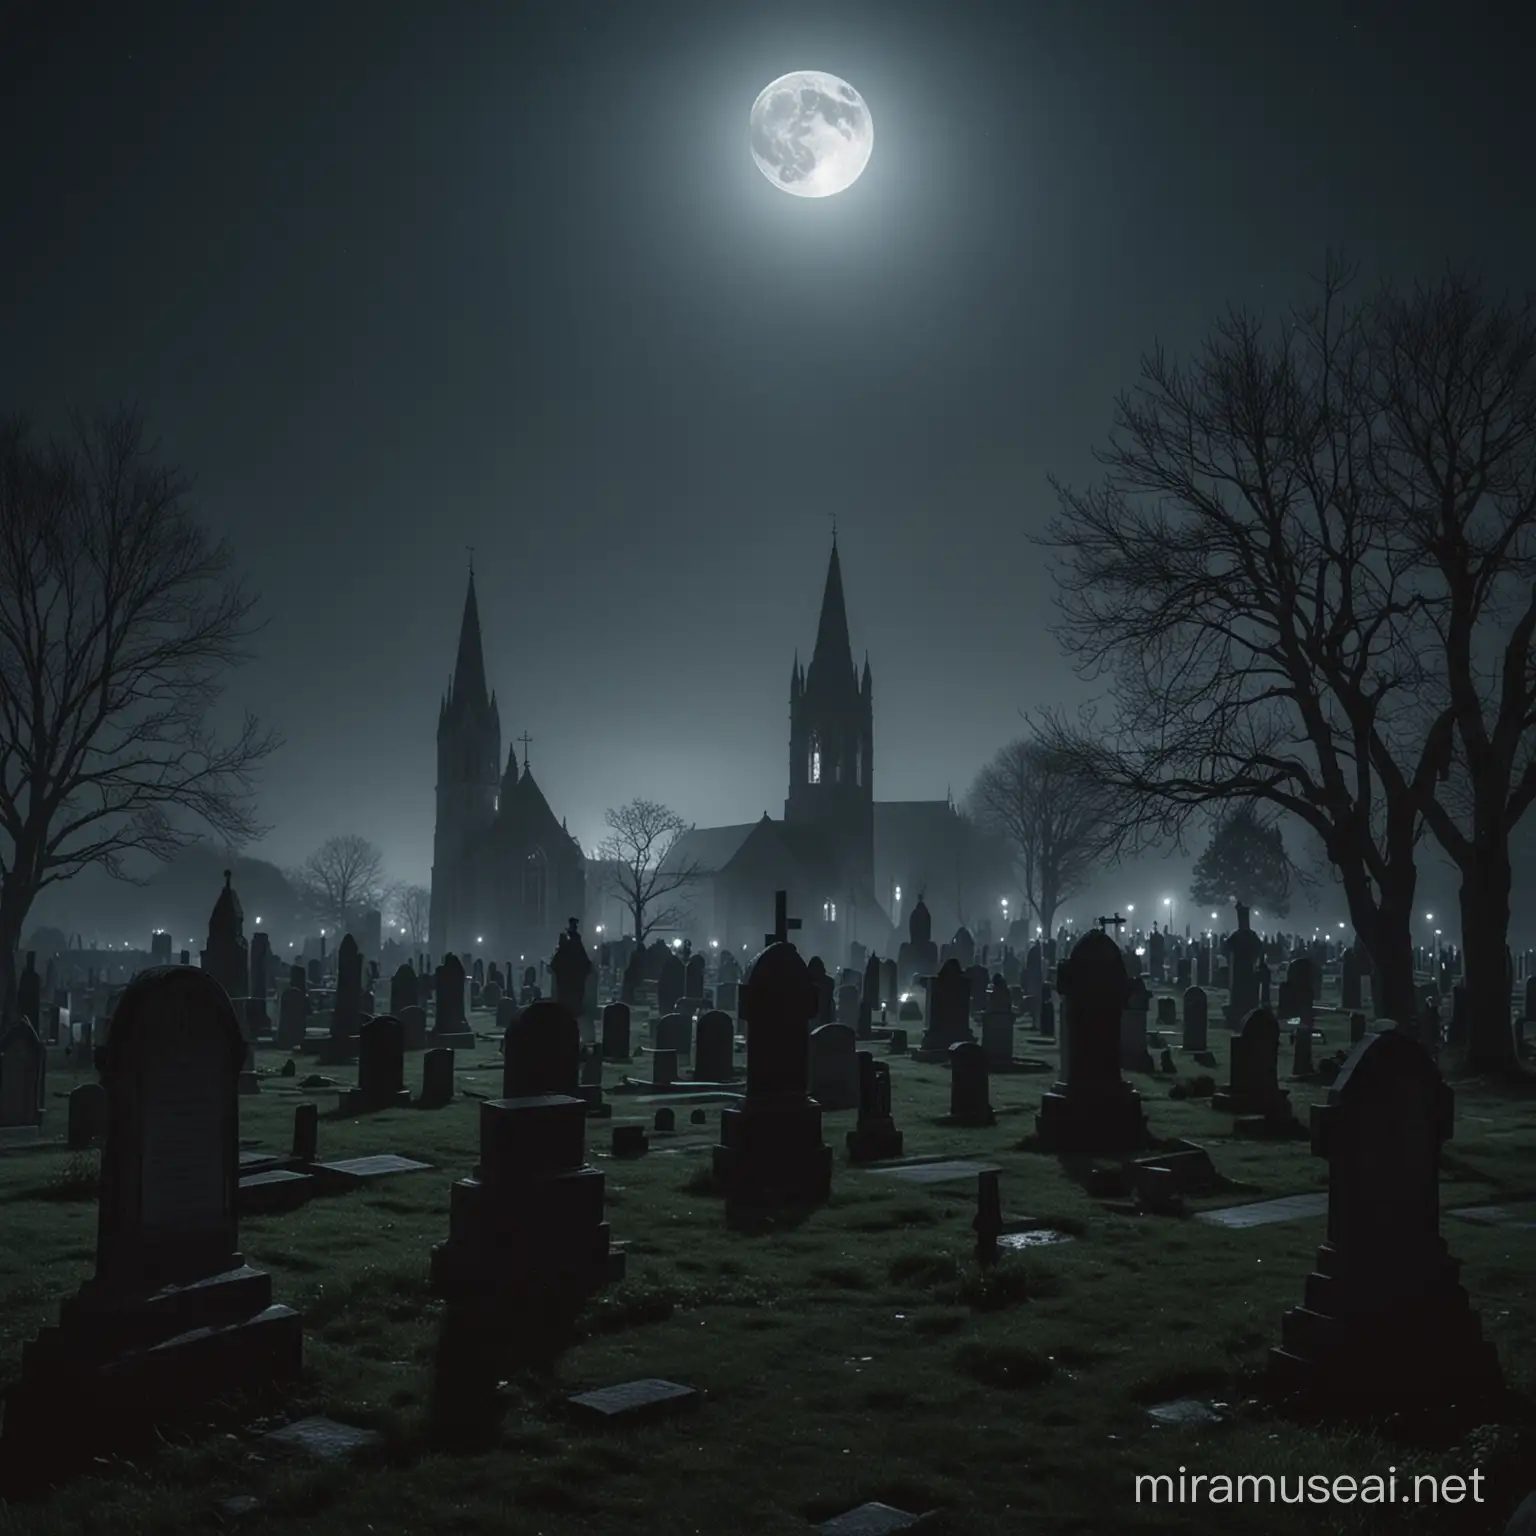 a cemetery in a dark ambience, with the lights on the gravestones, a medieval atmosphere and a church in the distance, with the moon